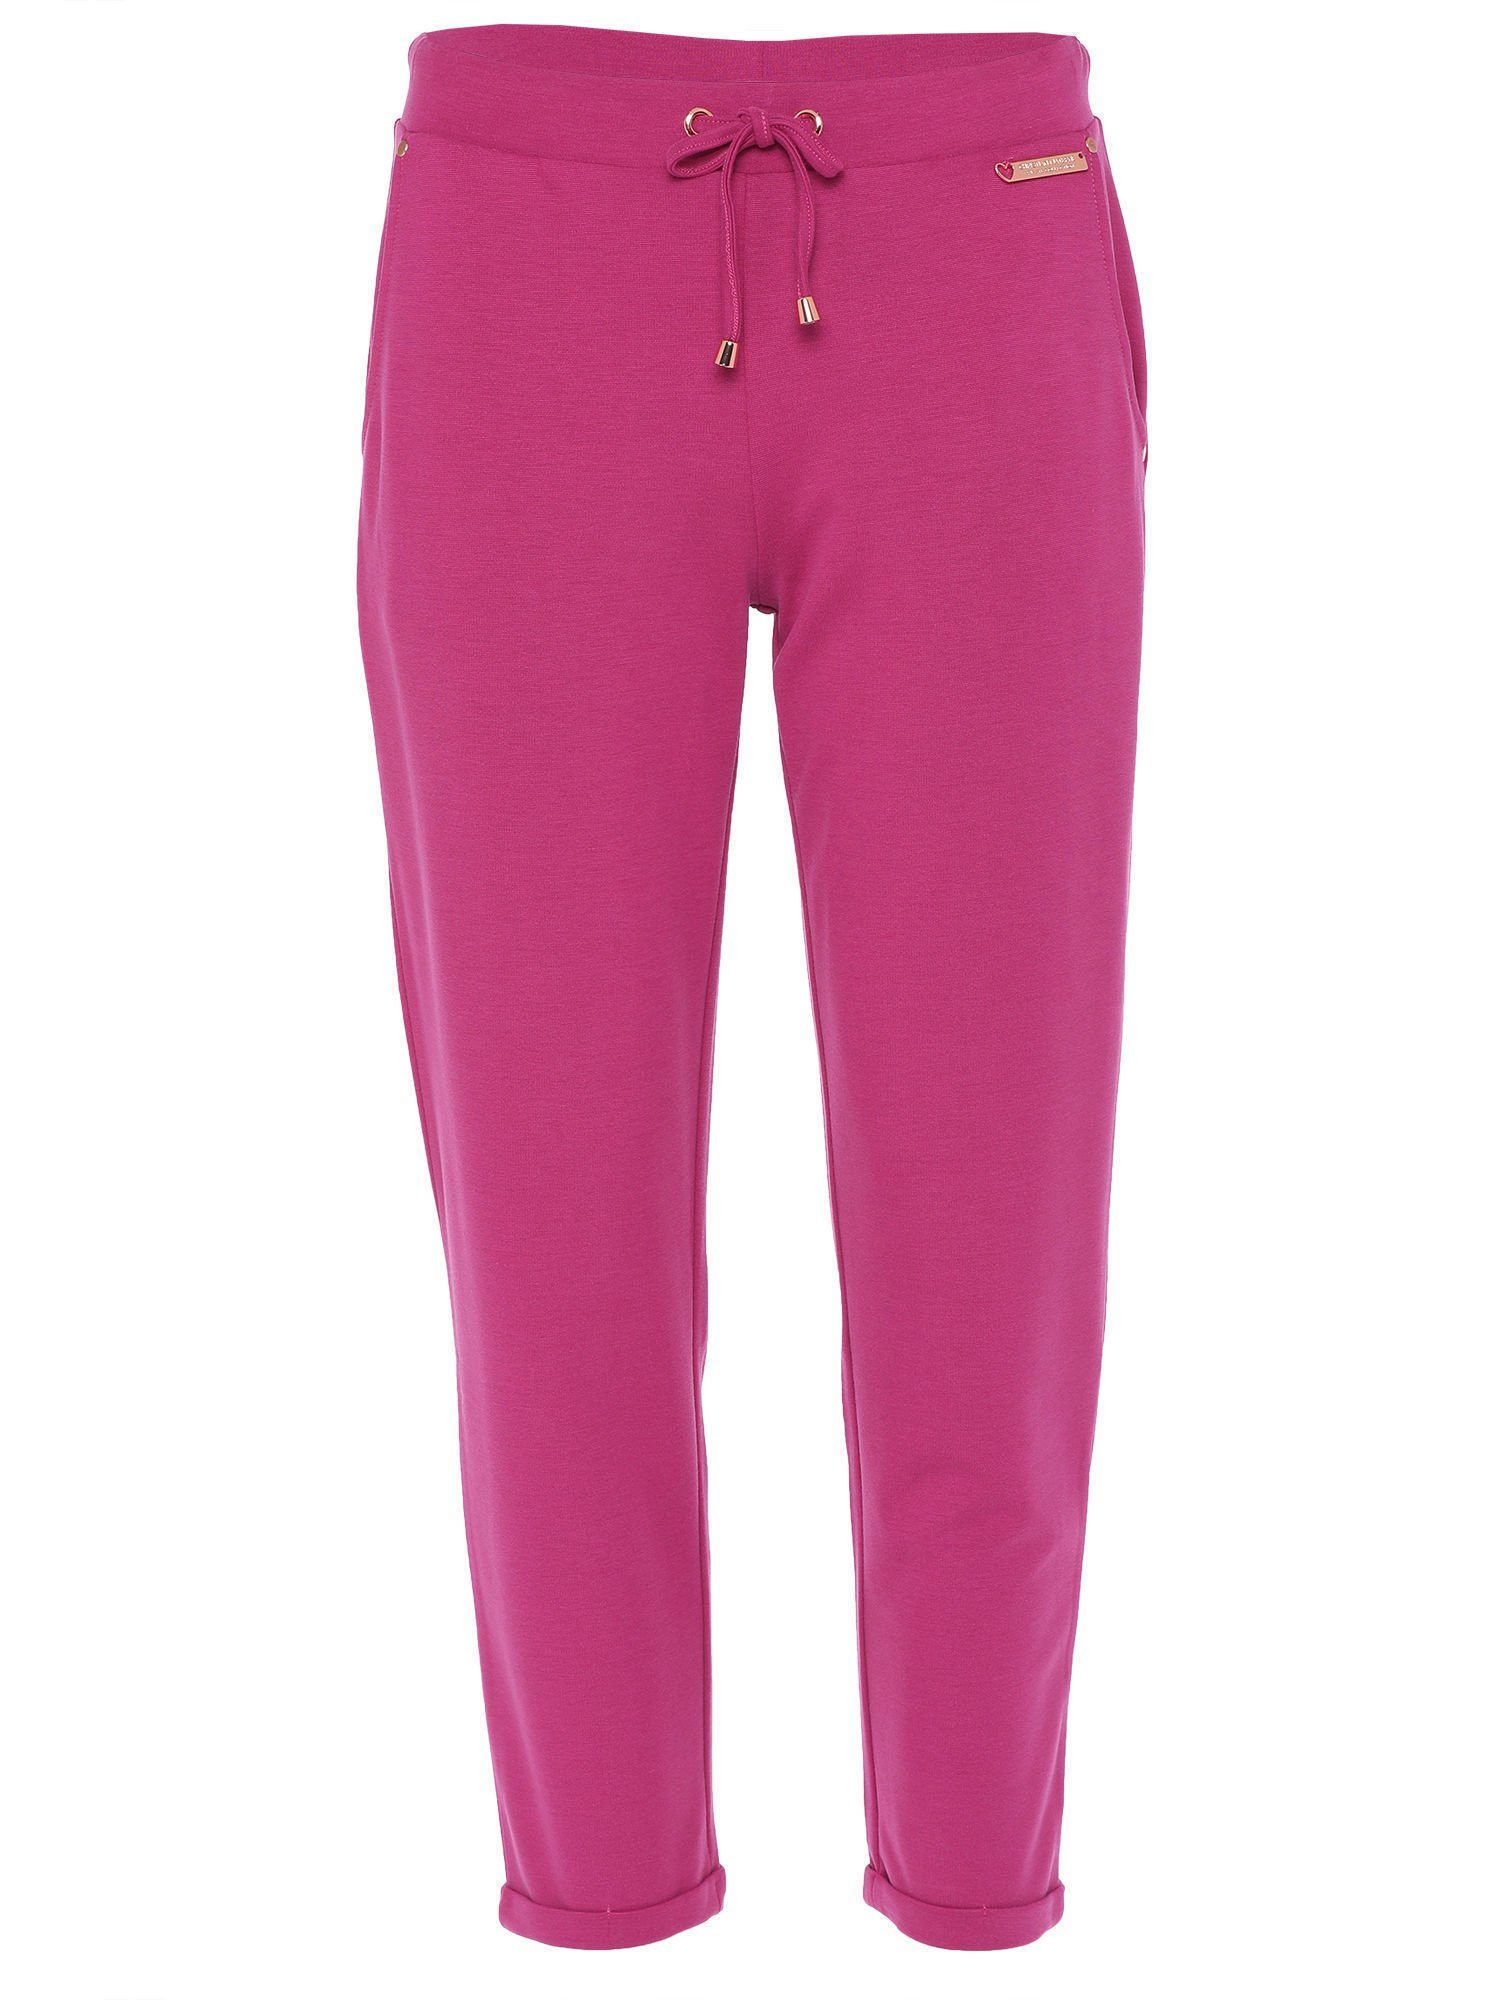 Christian Materne Jogger Pants Umschlagsaum mit fuchsia Relaxhose